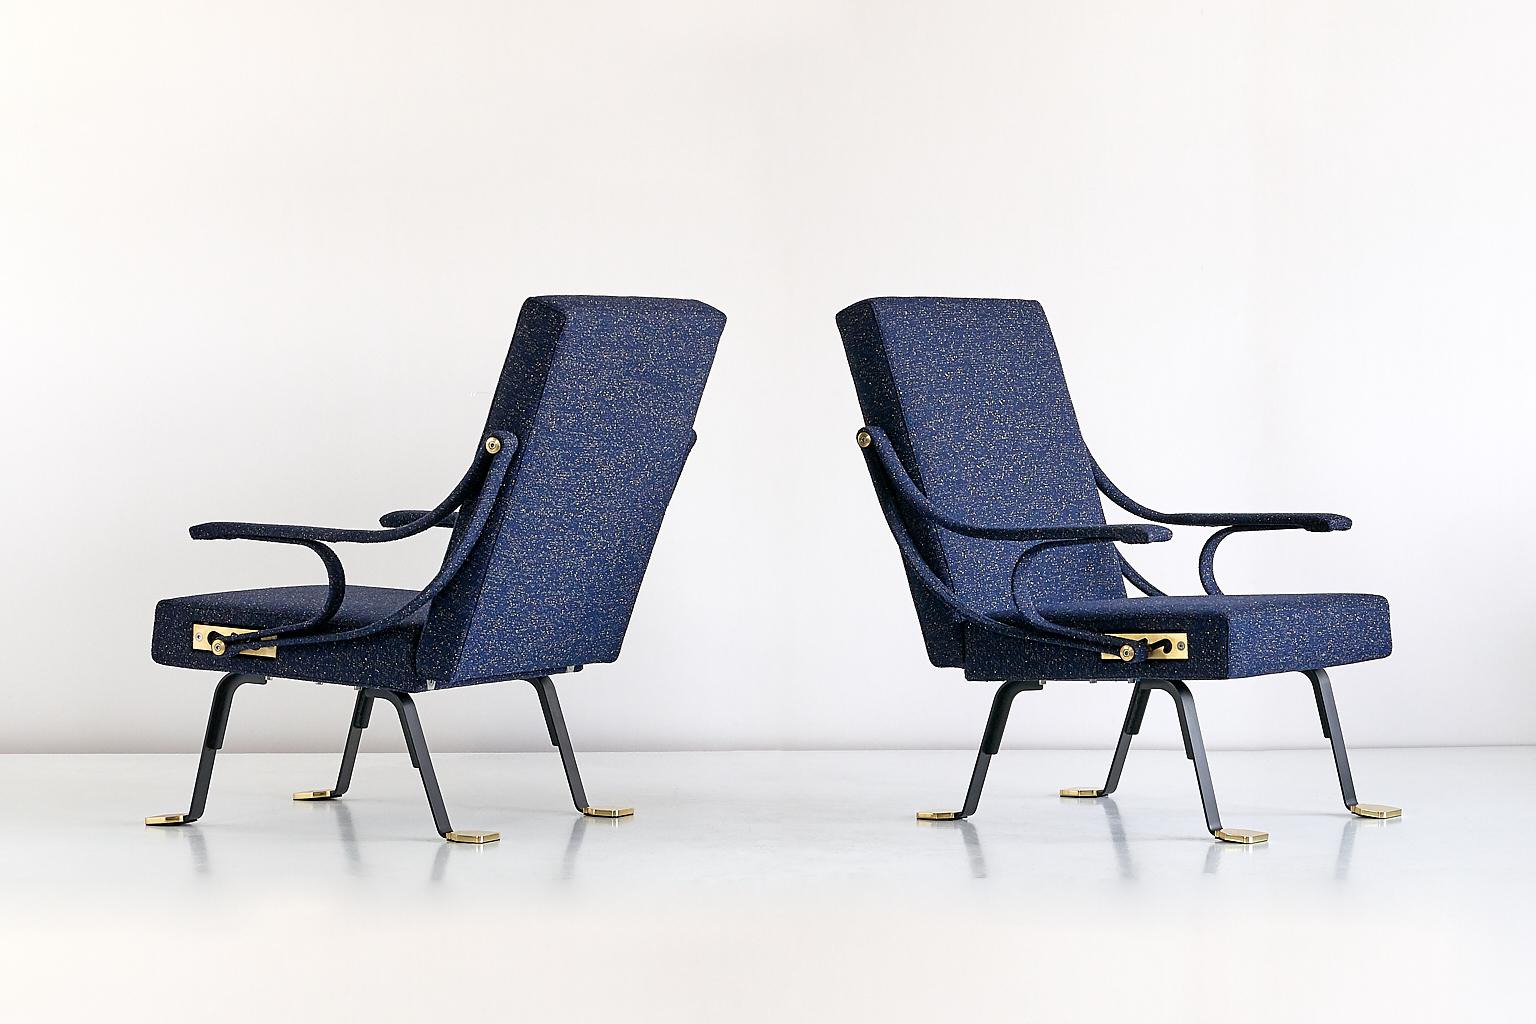 Polished Pair of Ignazio Gardella Digamma Armchairs in Navy Raf Simons for Kvadrat Fabric